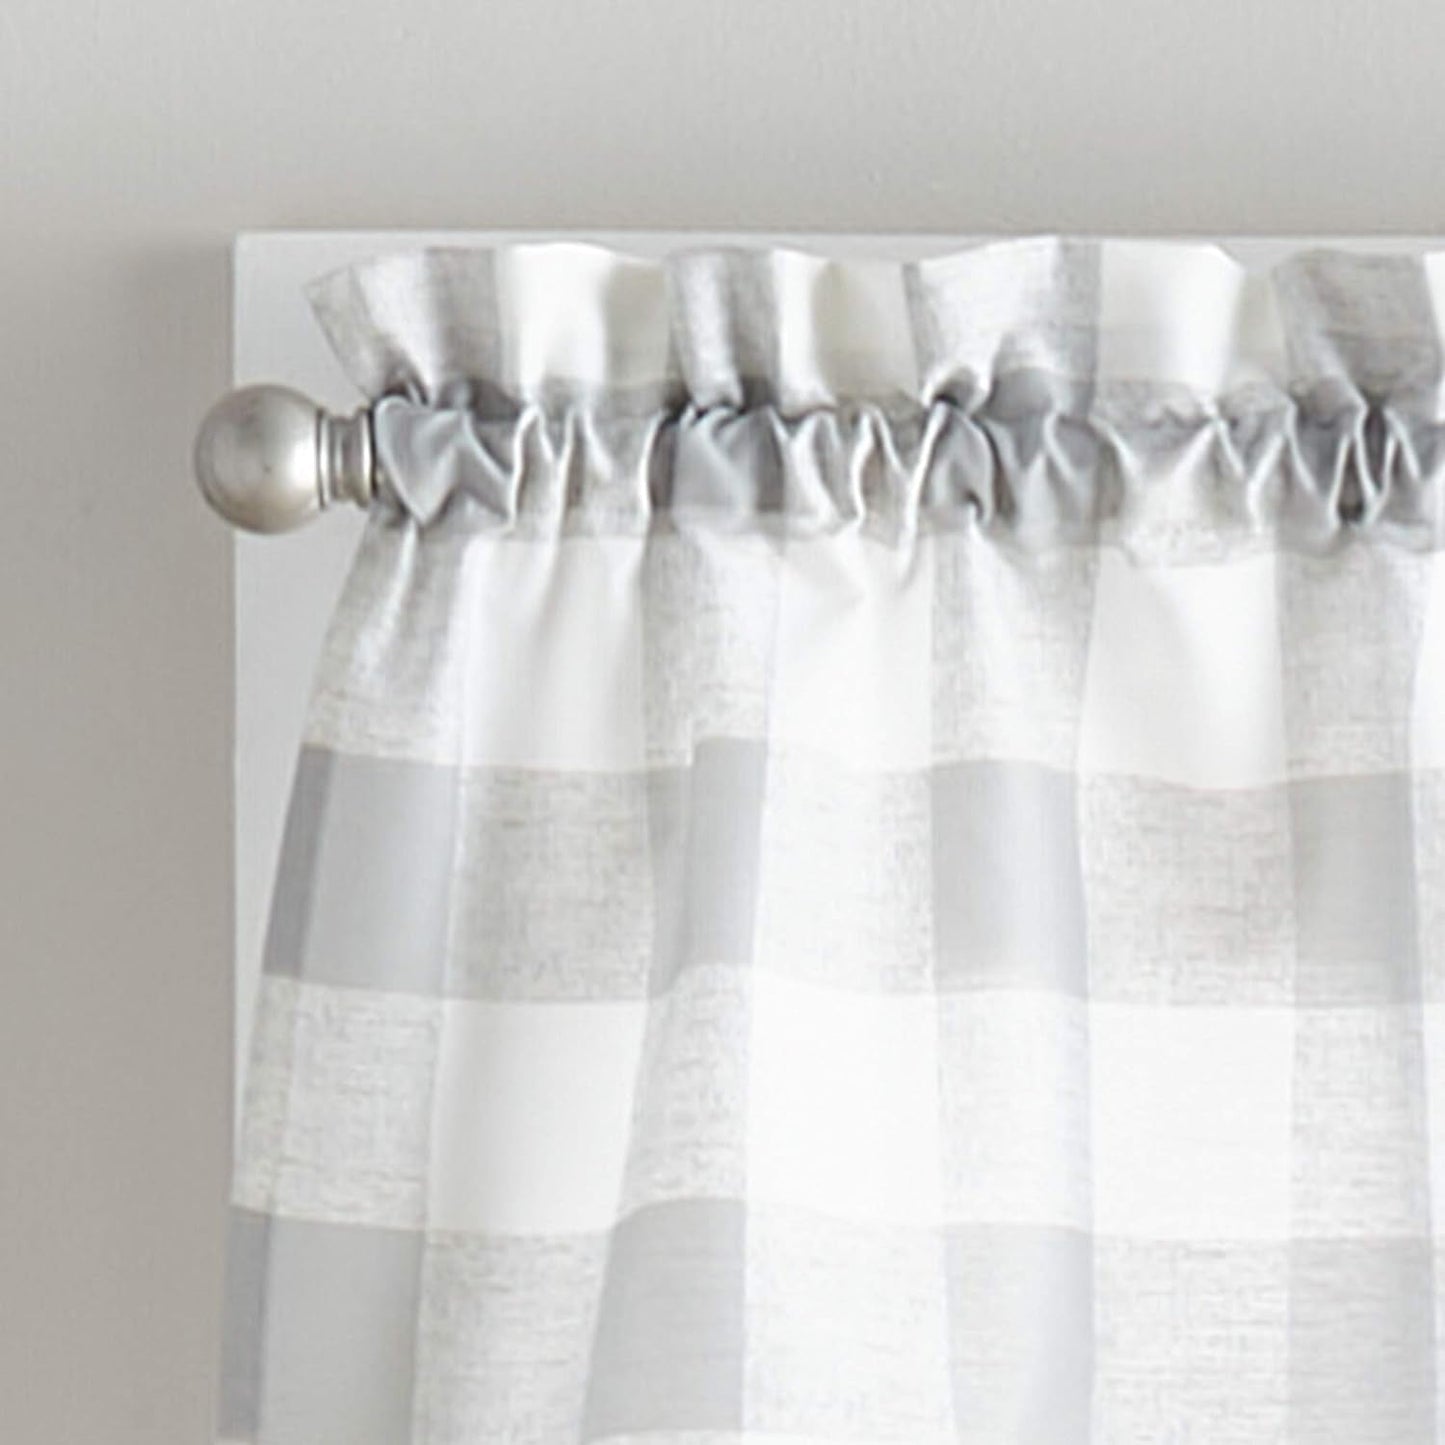 Curtainworks Country Modern Rustic Farmhouse Buffalo Check Kitchen Curtains Window Cafe, 36" Tier & Valance Set - 3 Pc, Grey